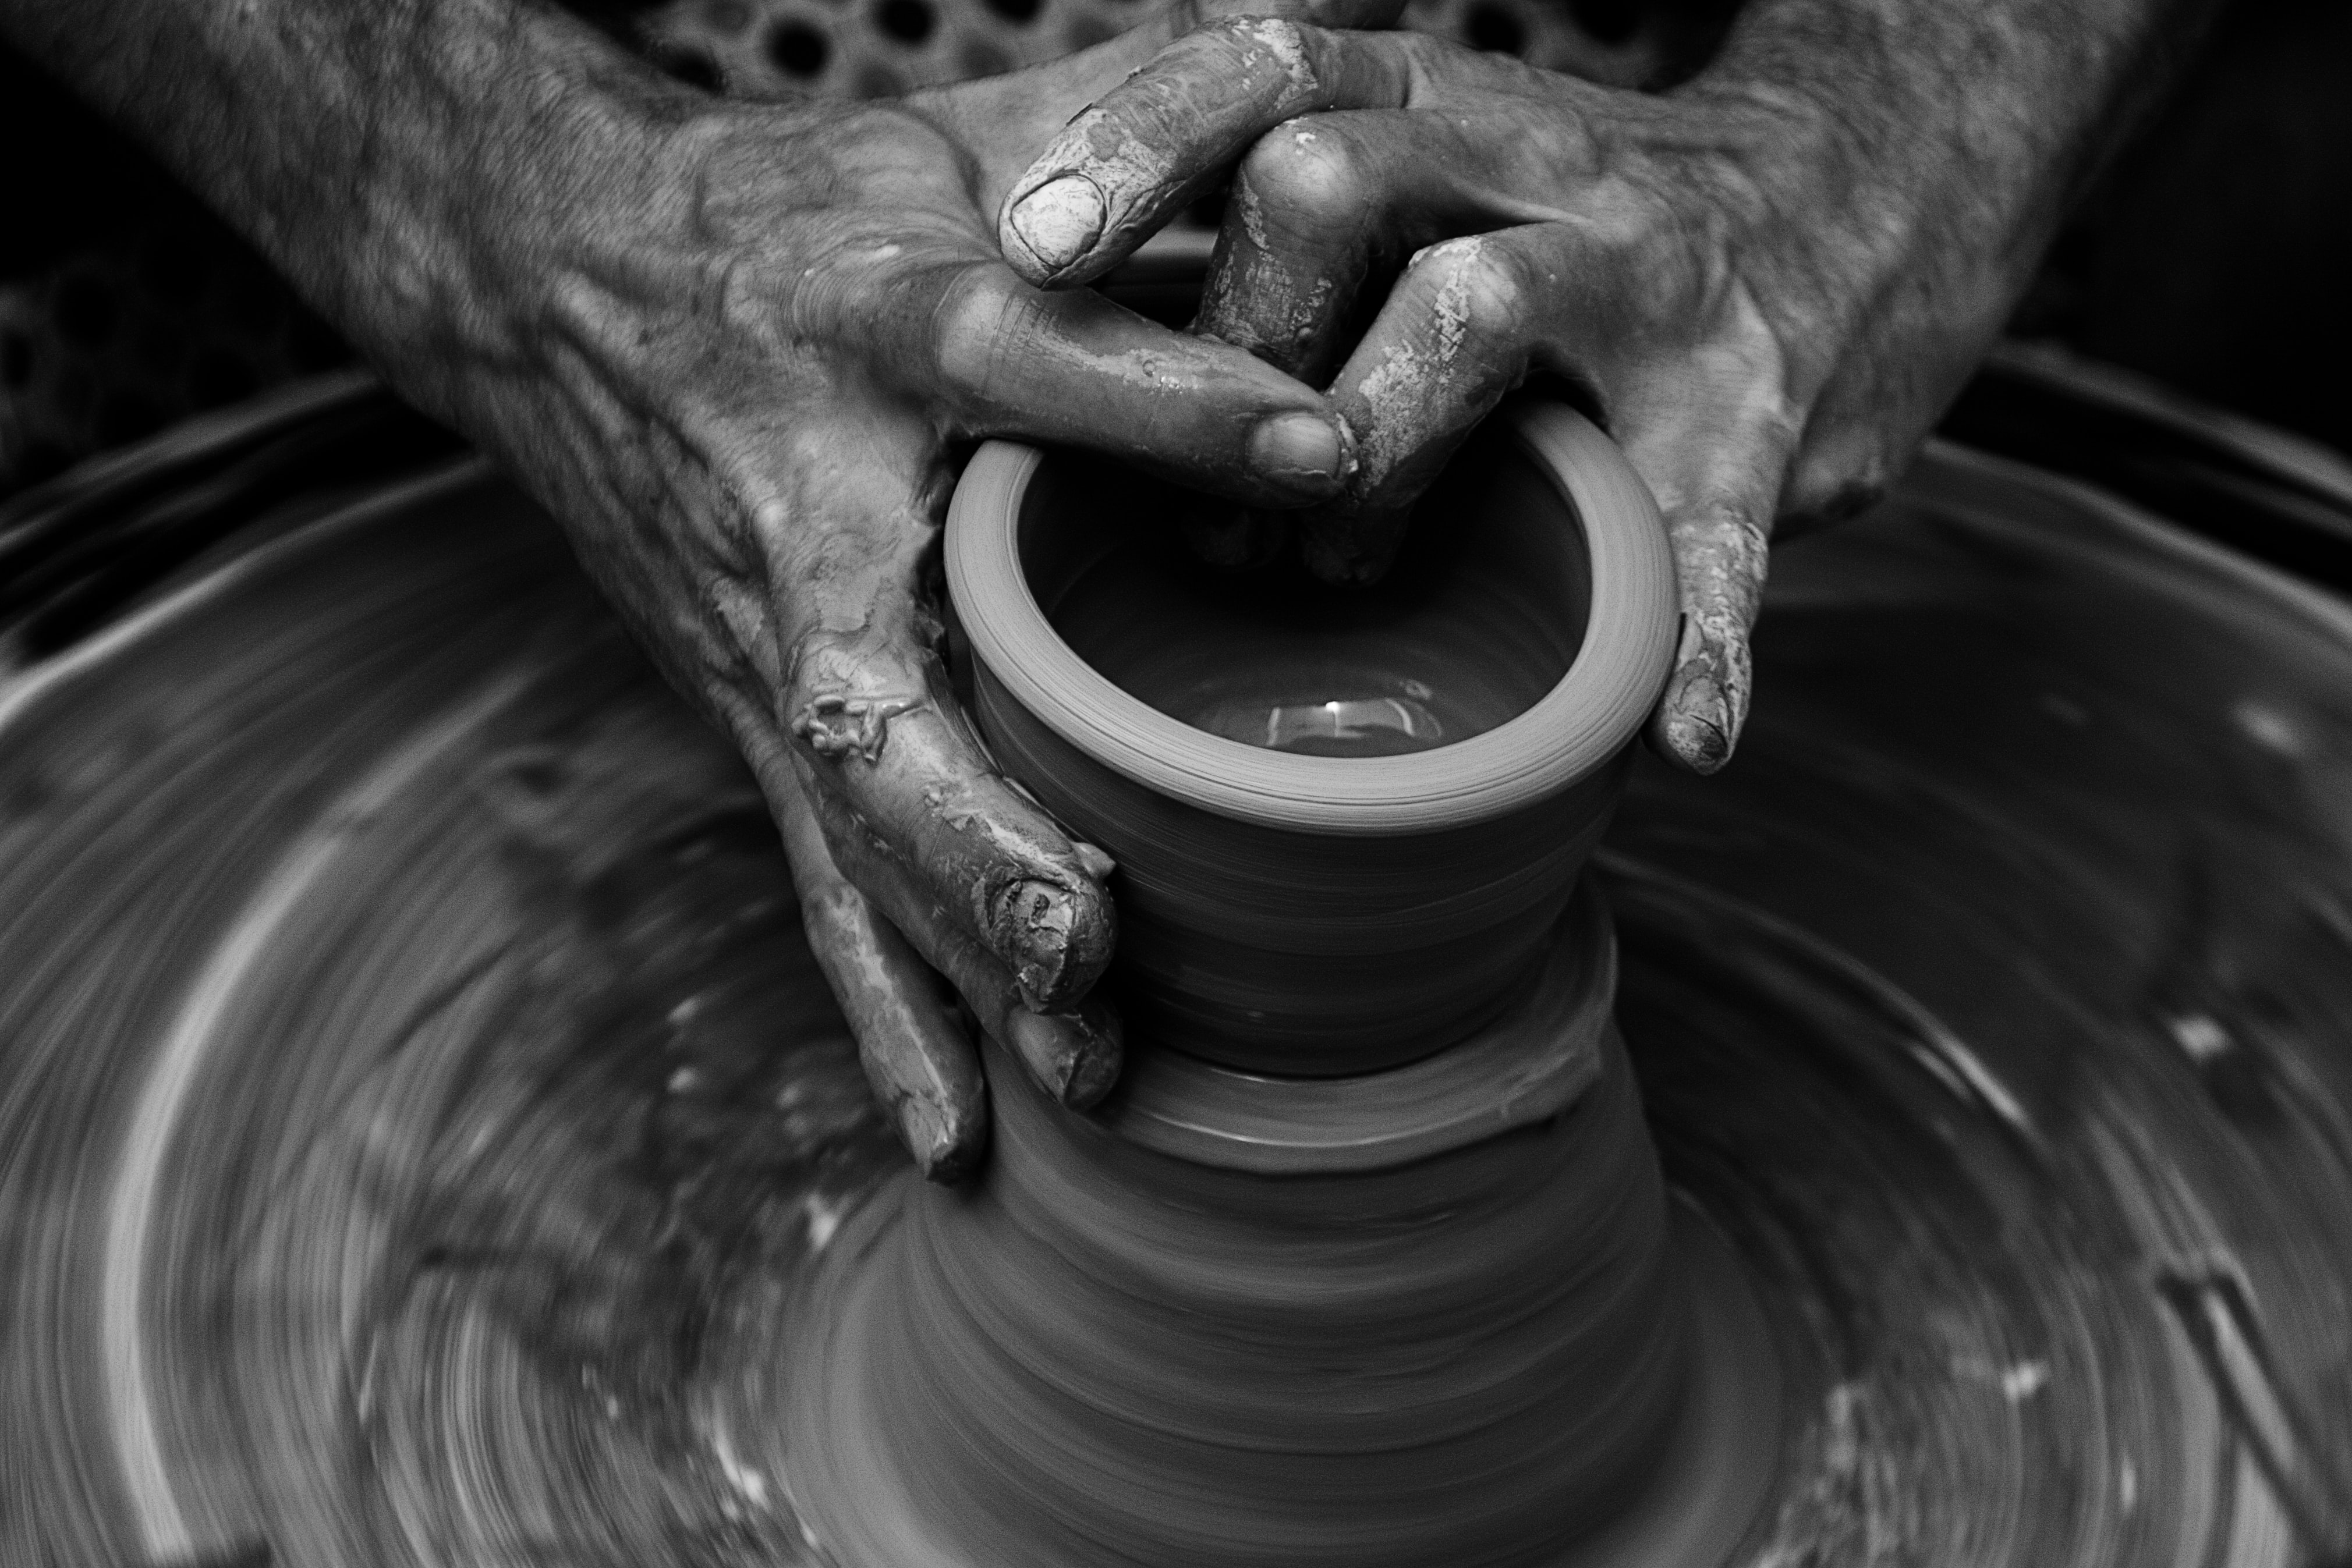 Artisans In The Philippines , HD Wallpaper & Backgrounds